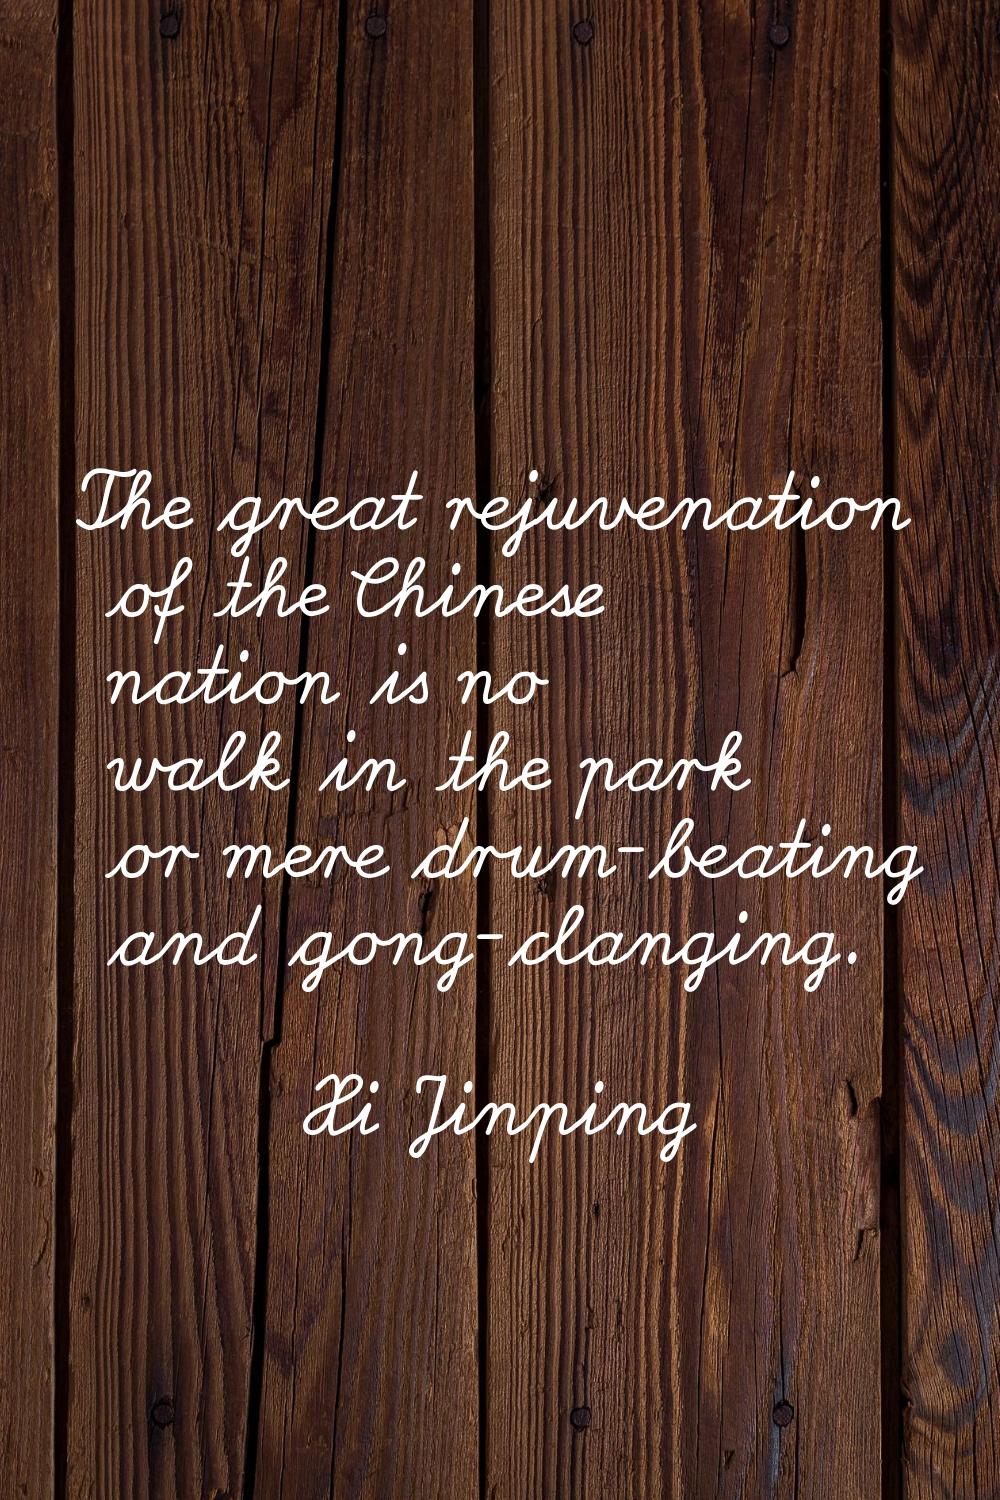 The great rejuvenation of the Chinese nation is no walk in the park or mere drum-beating and gong-c